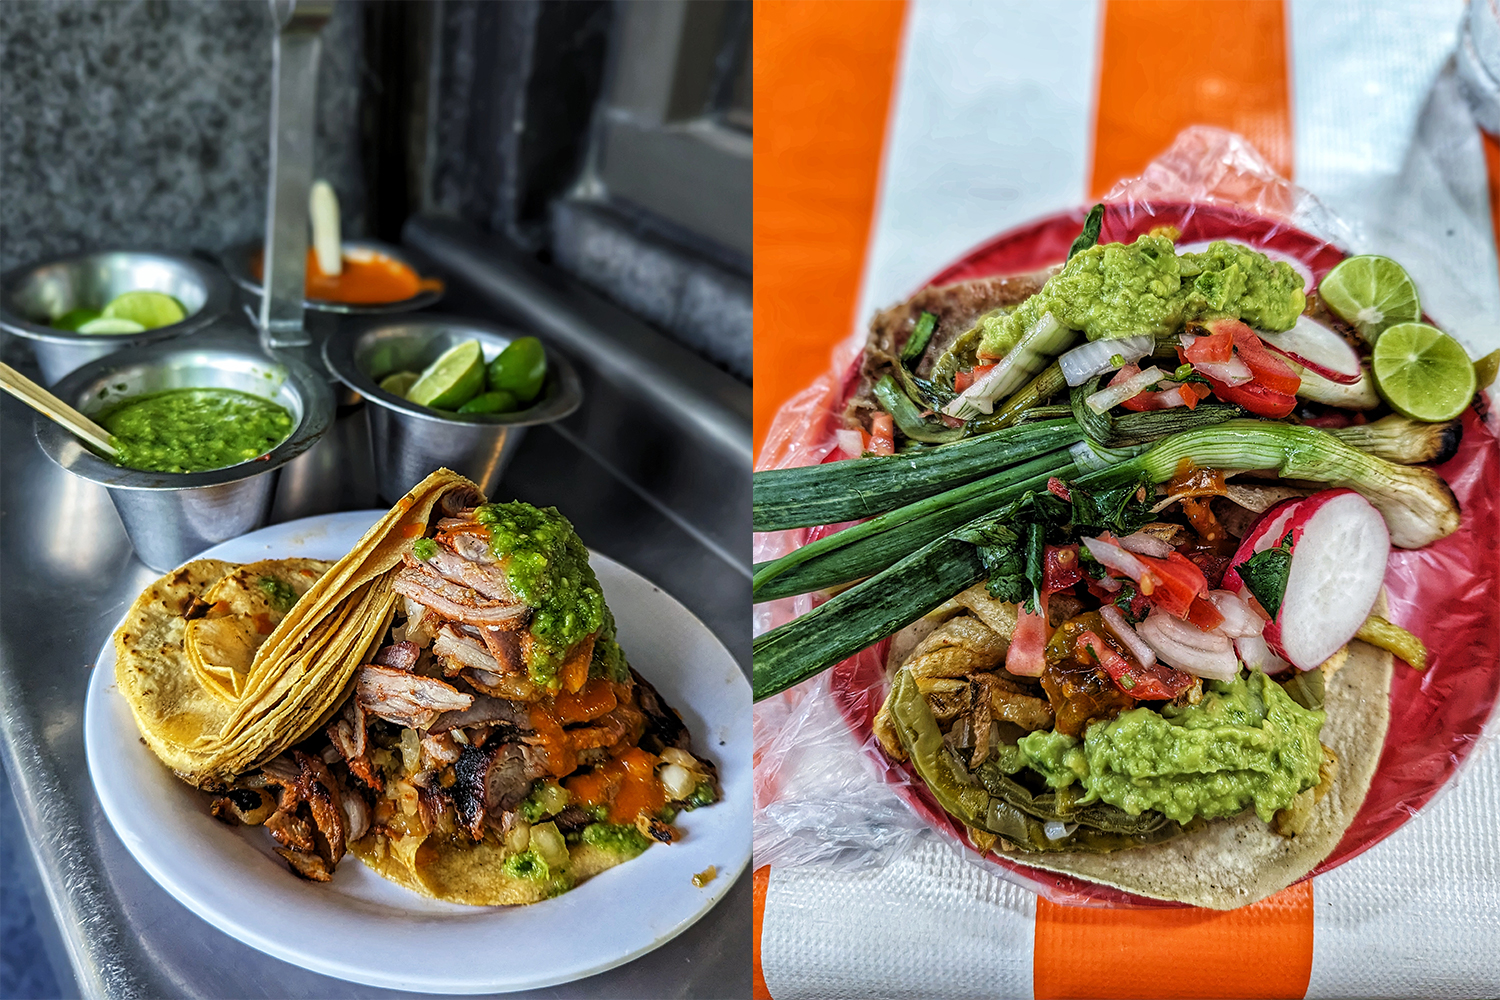 Looking for the best tacos in Mexico City? These are just a couple great CDMX options.